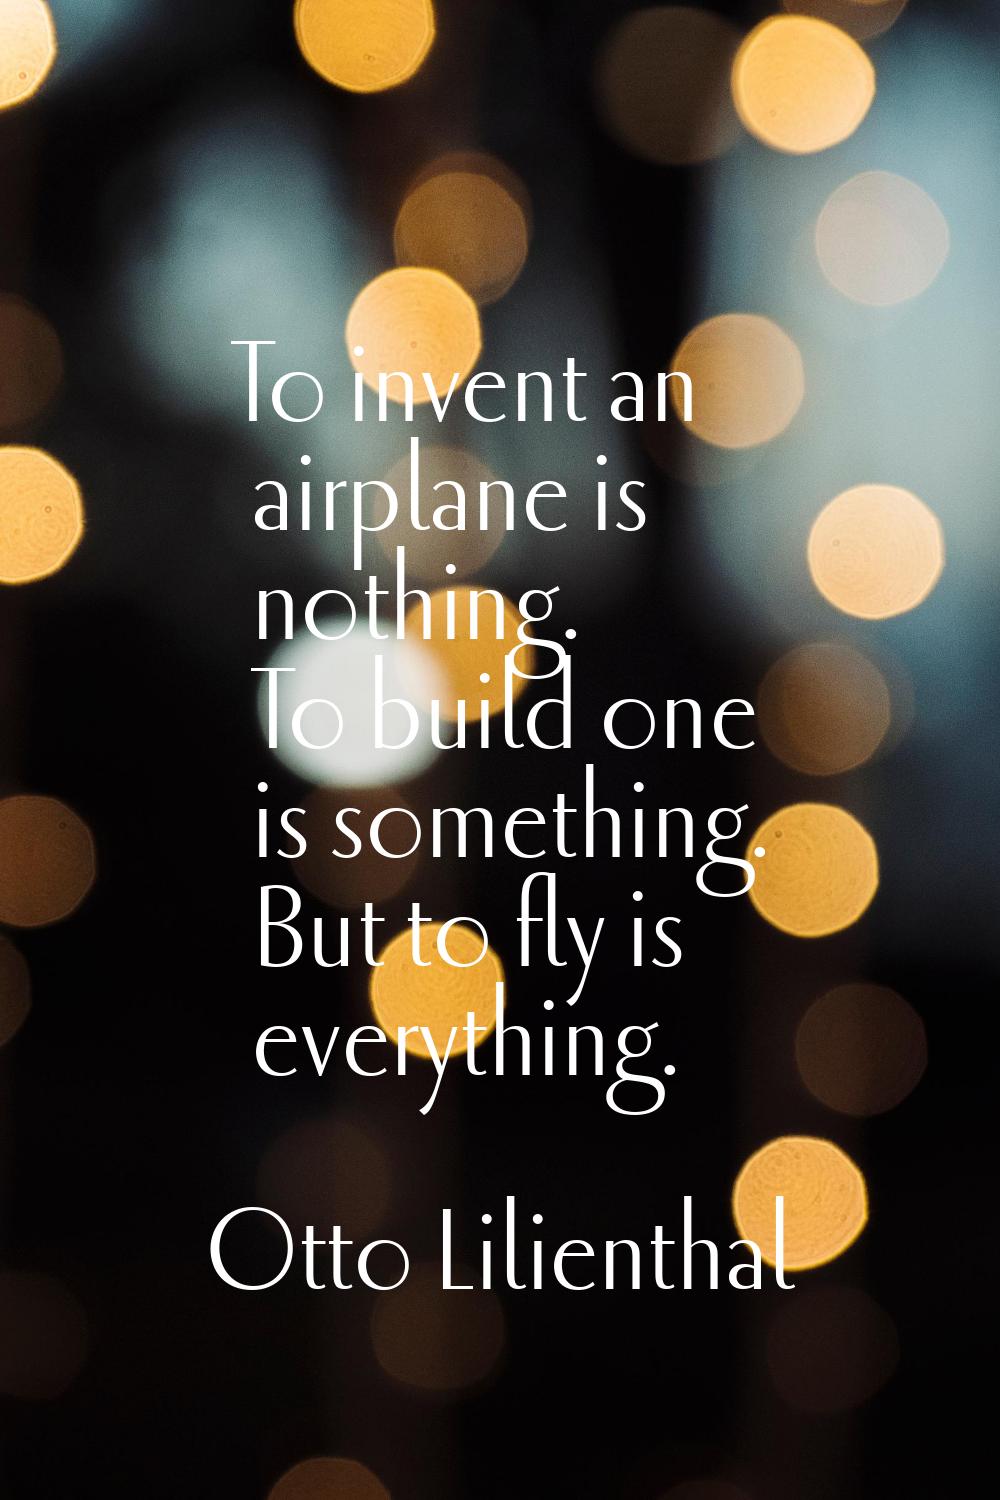 To invent an airplane is nothing. To build one is something. But to fly is everything.